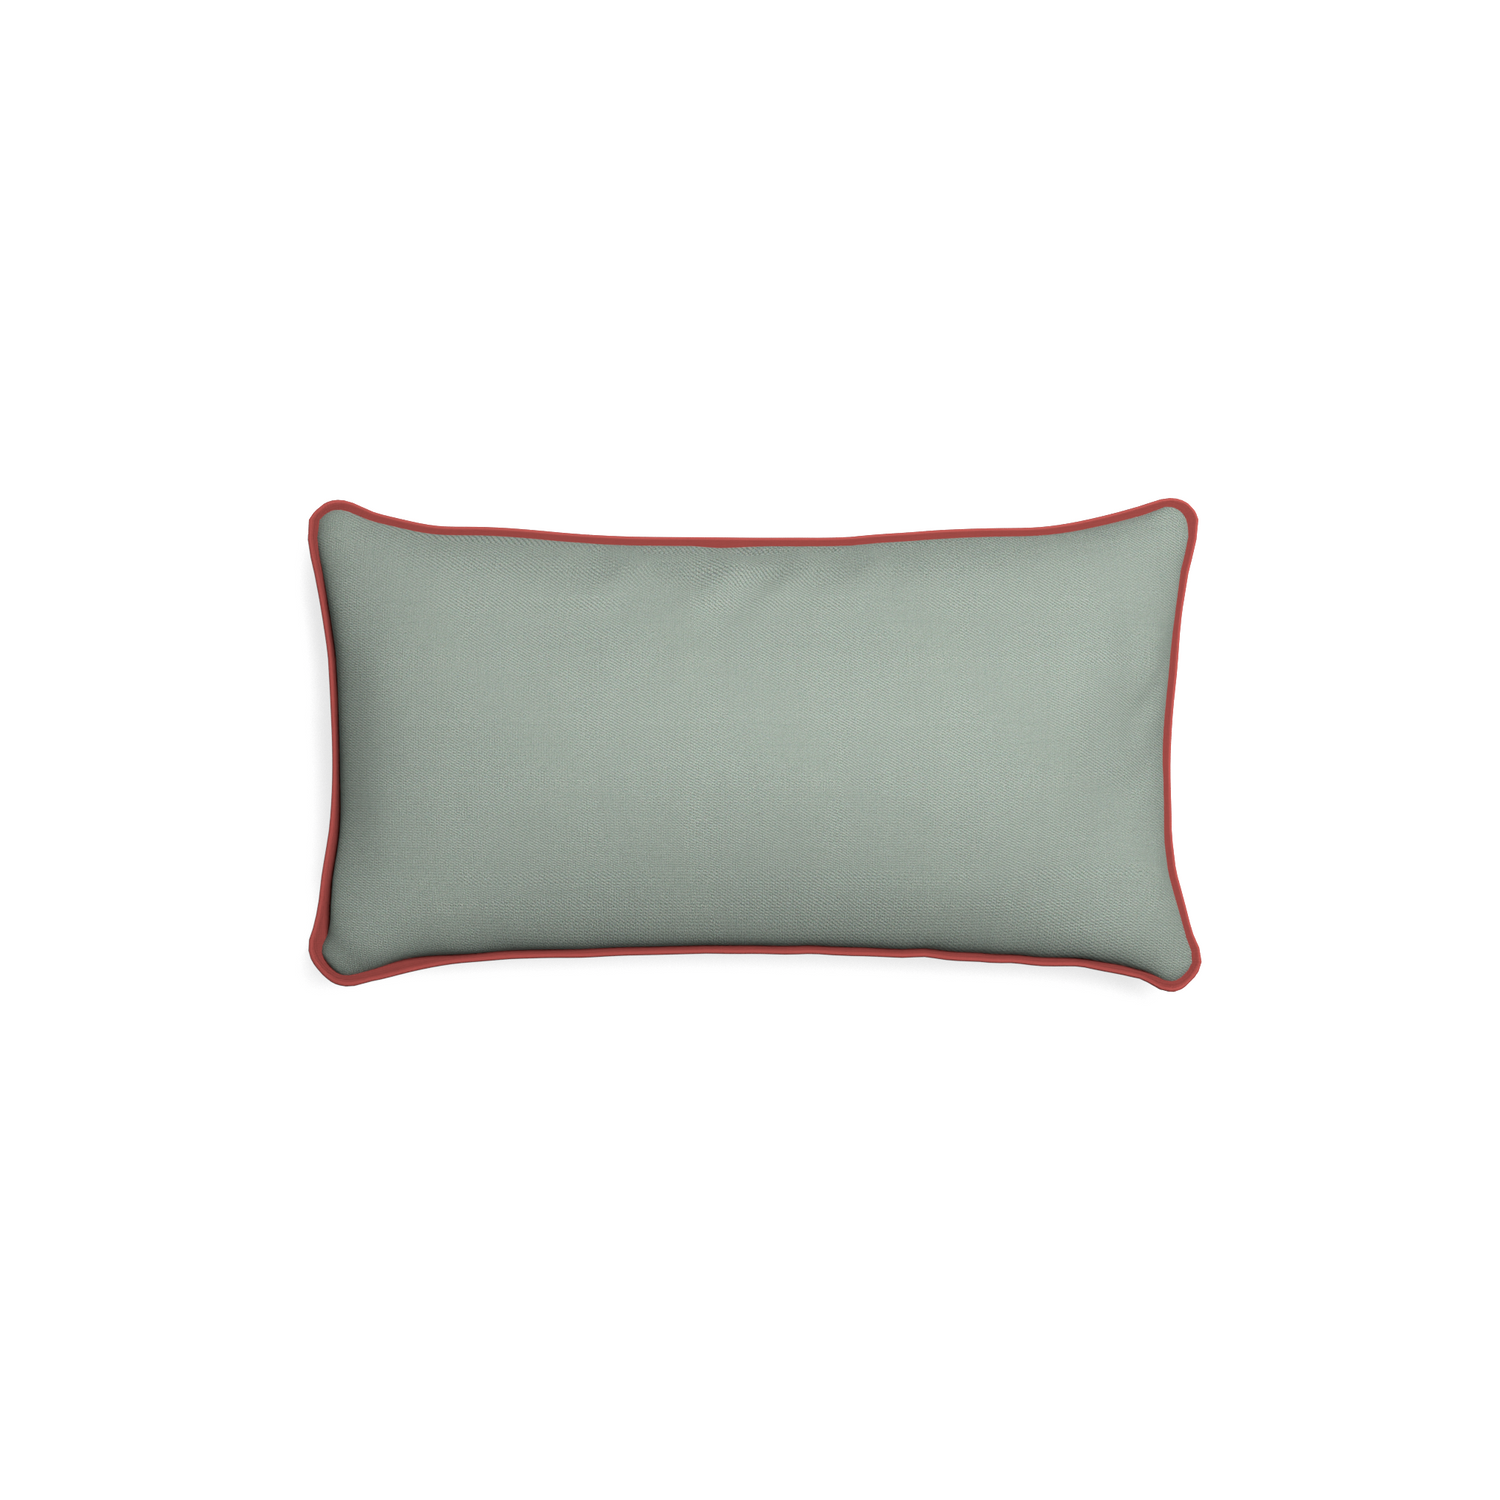 Xl-lumbar sage custom sage green cottonpillow with c piping on white background